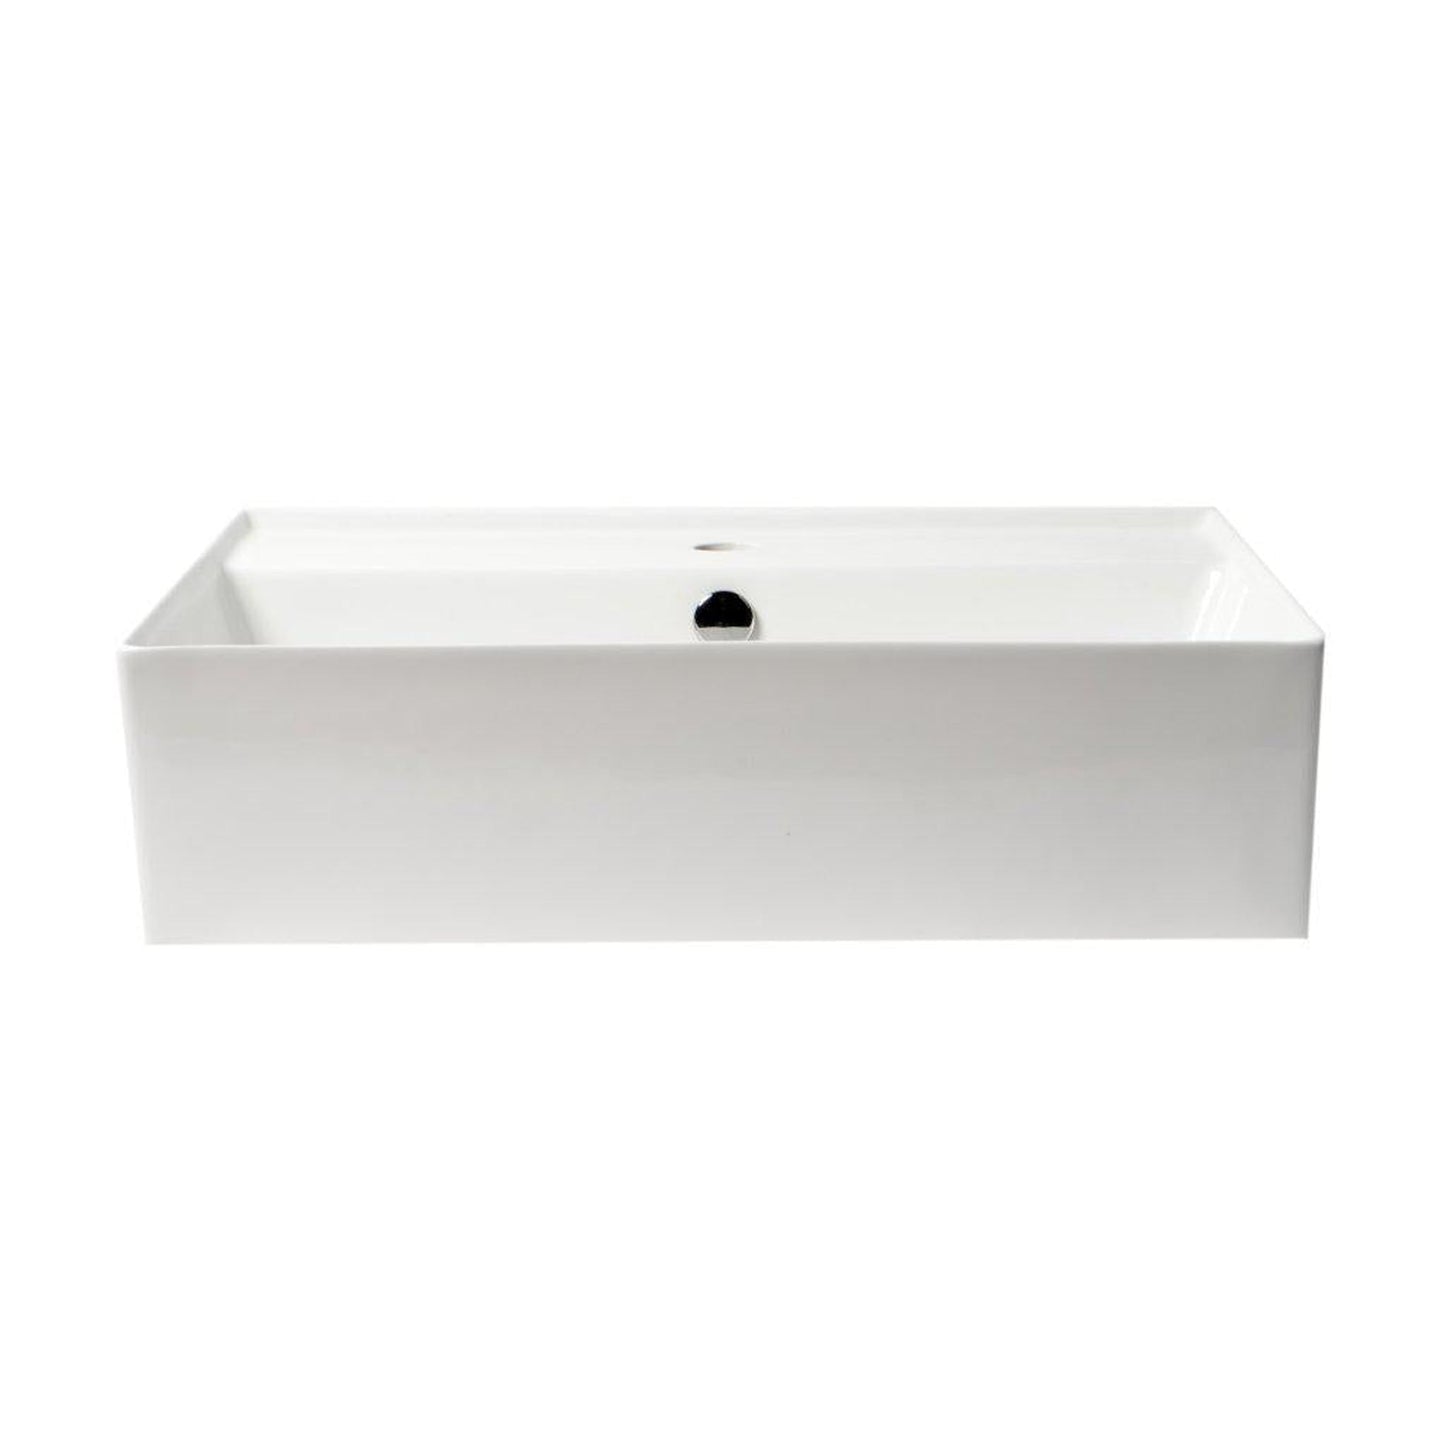 ALFI Brand ABC901-W 24" White Above Mount Rectangle Ceramic Bathroom Sink With Single Faucet Hole and Overflow